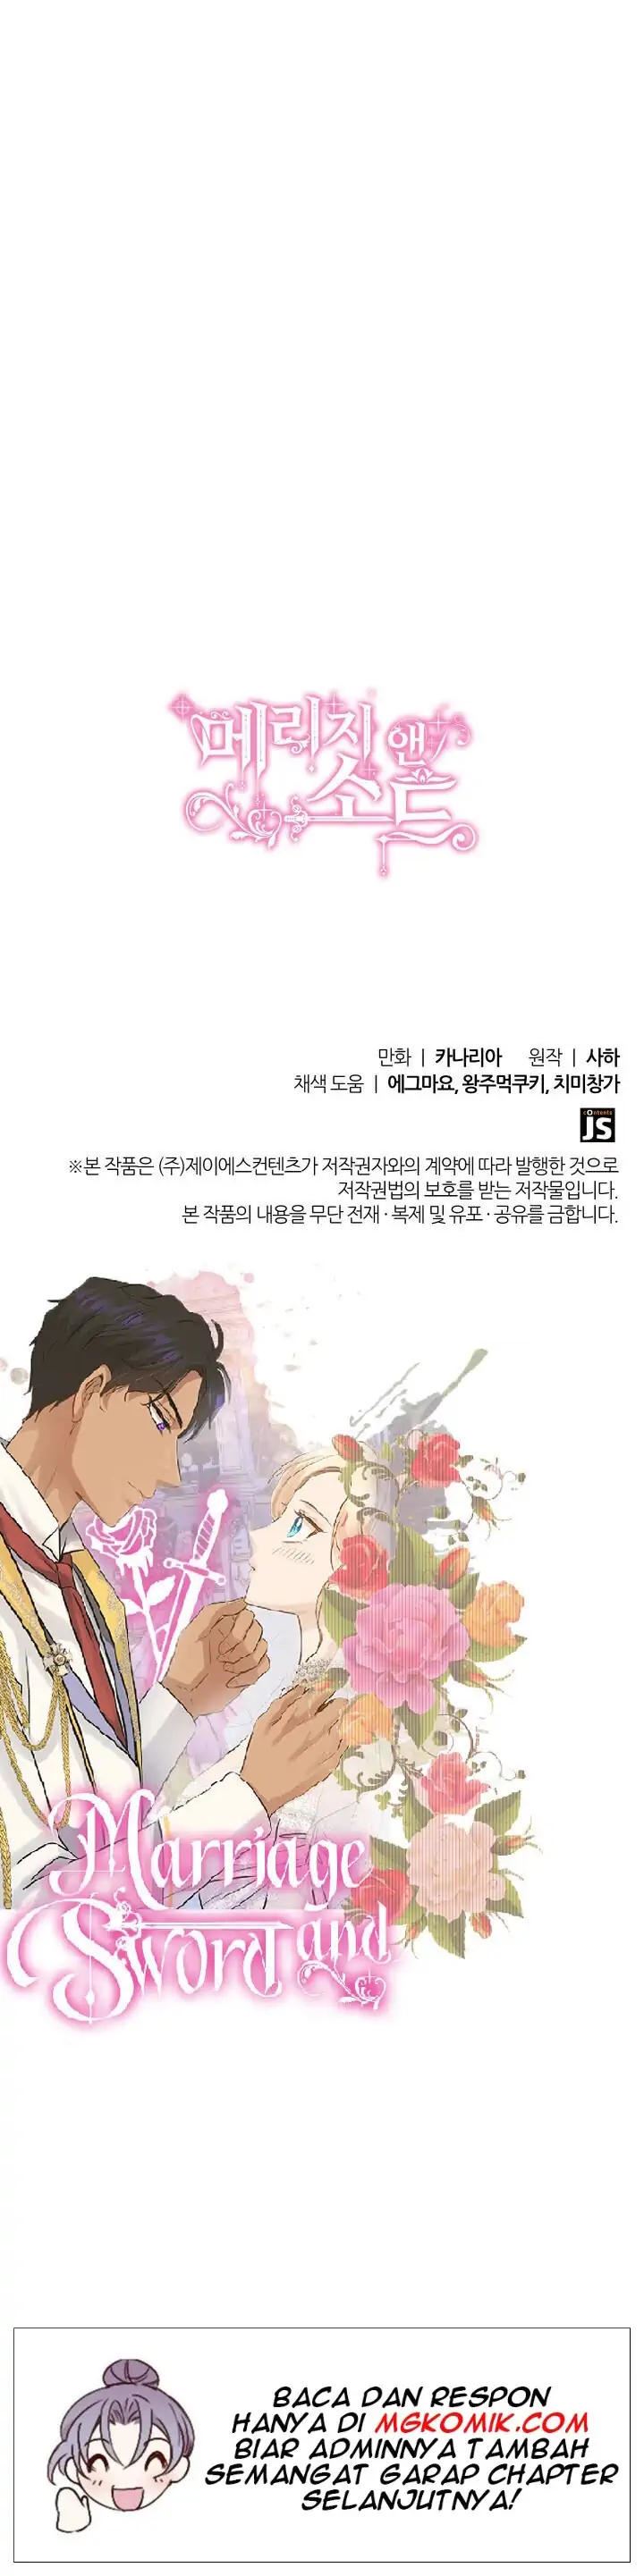 Marriage and Sword Chapter 14